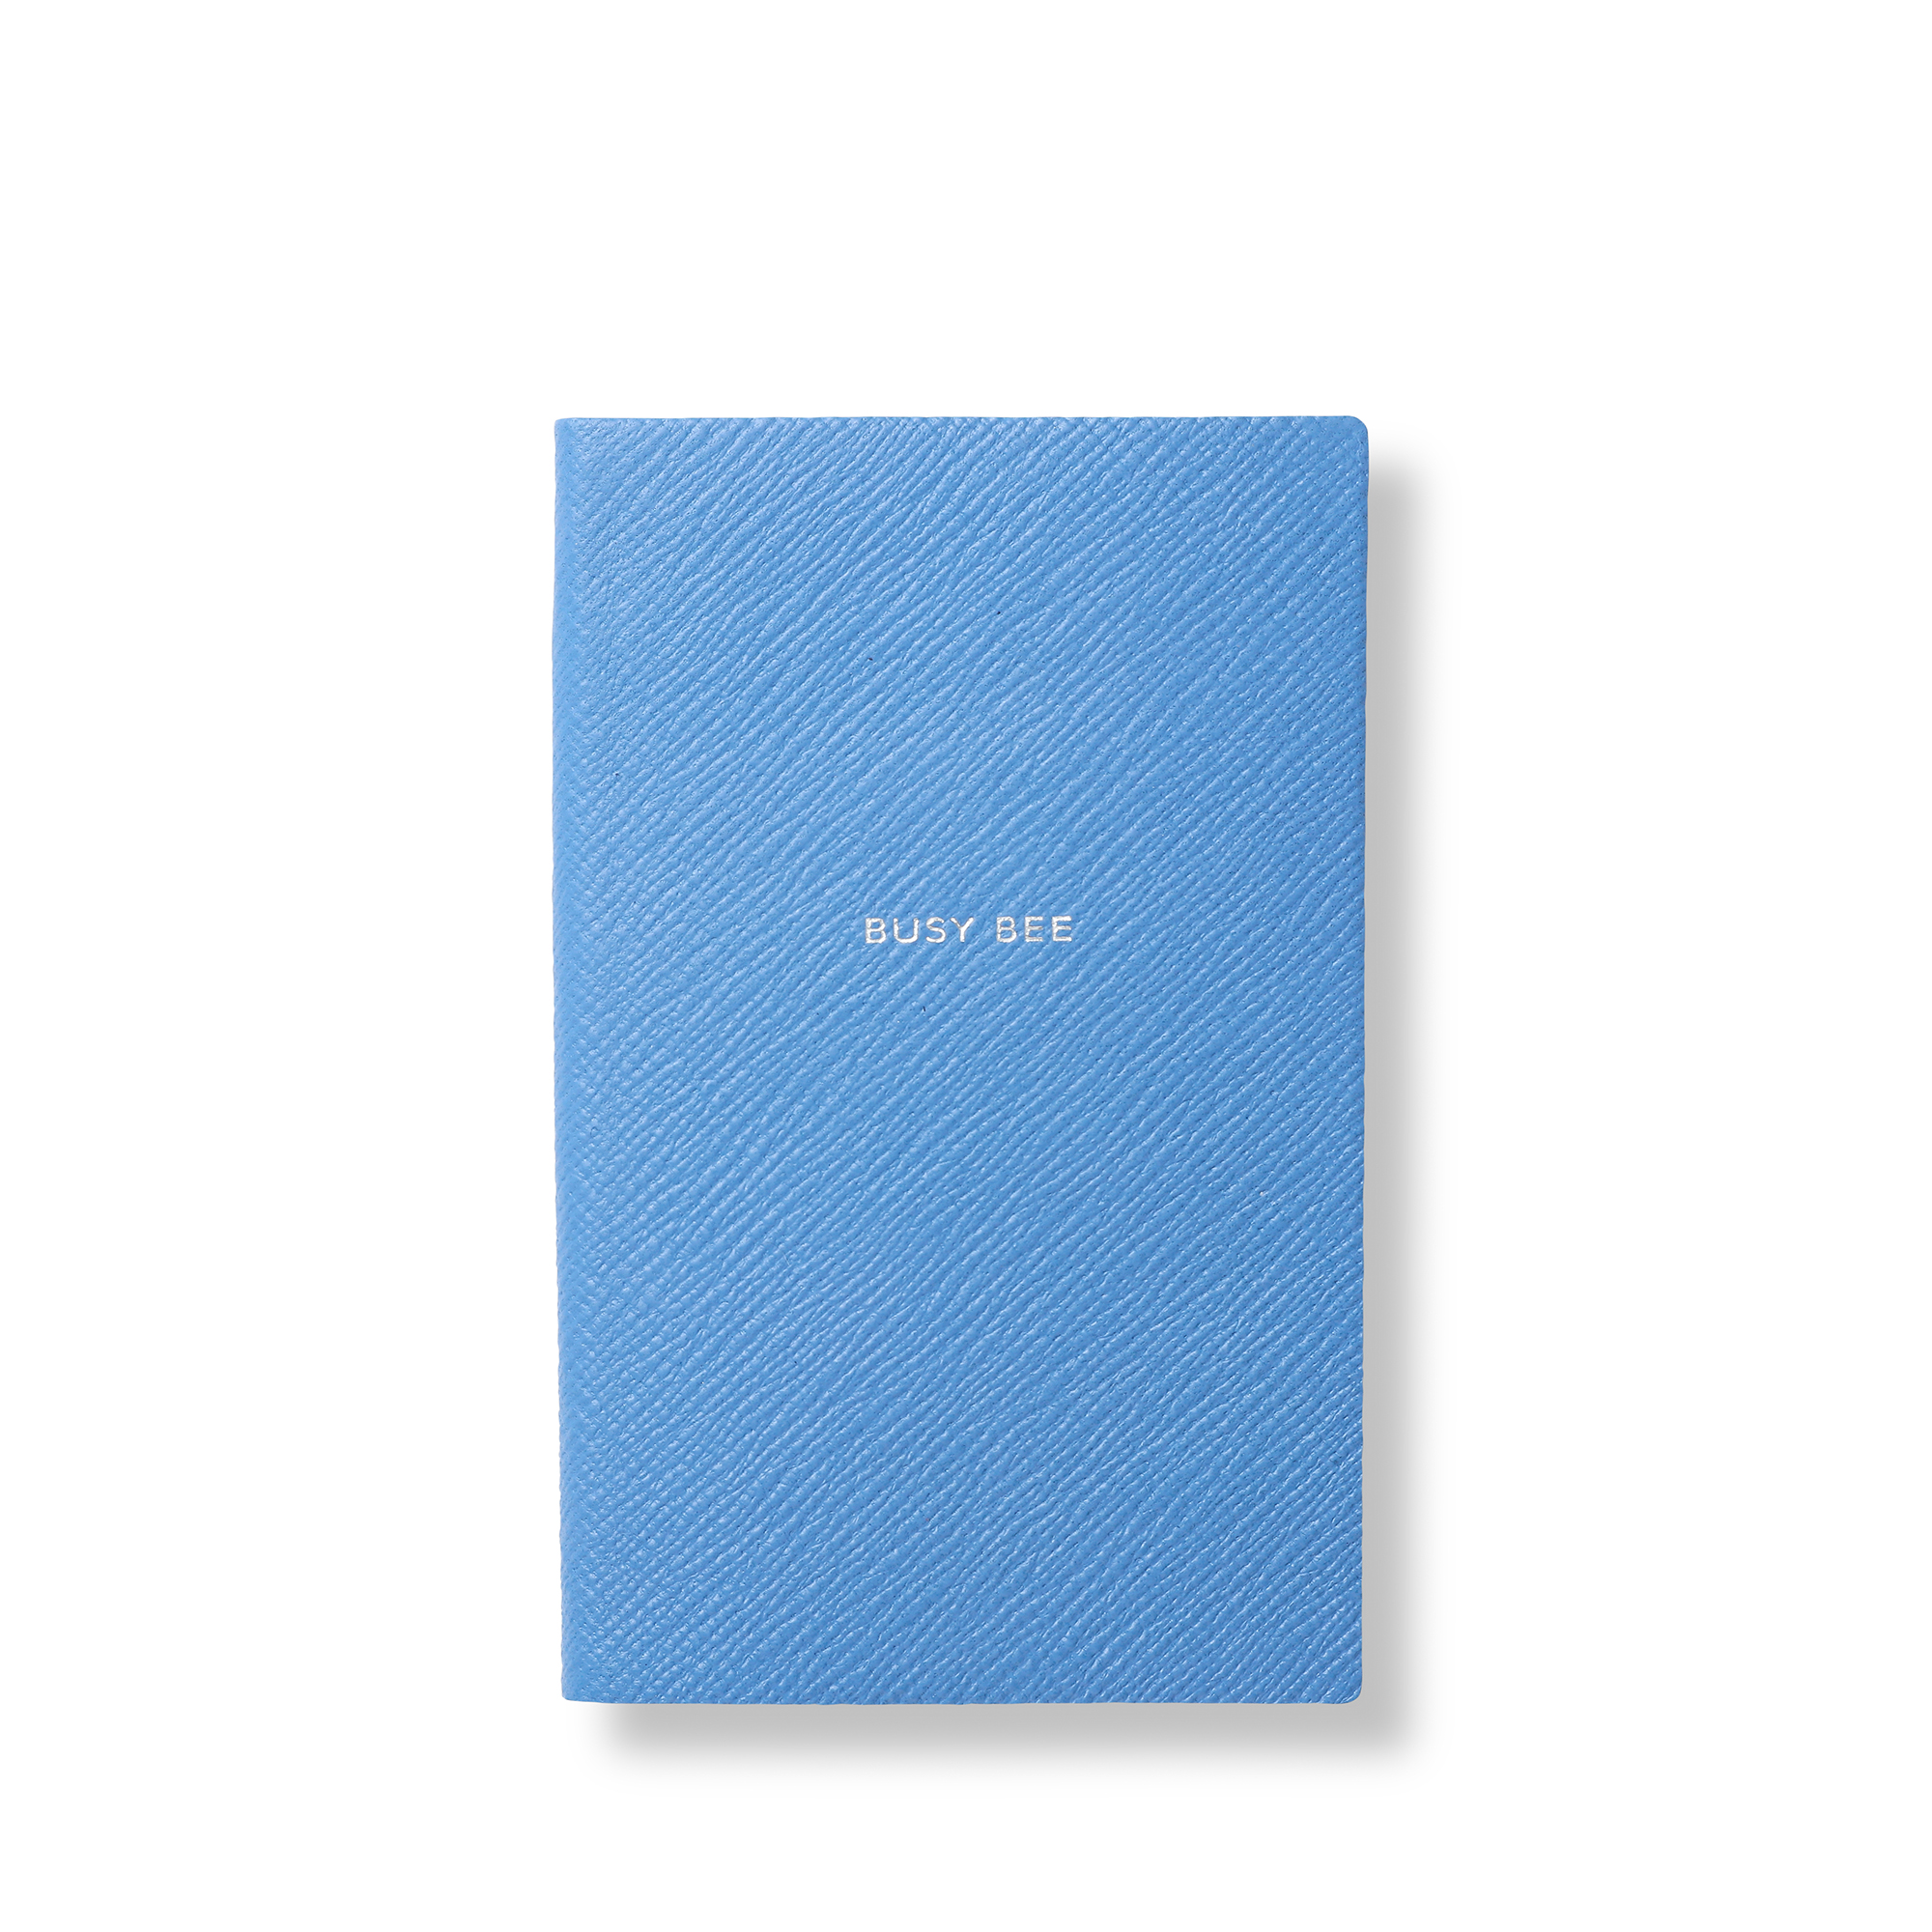 Smythson Busy Bee Panama Notebook In Nile Blue